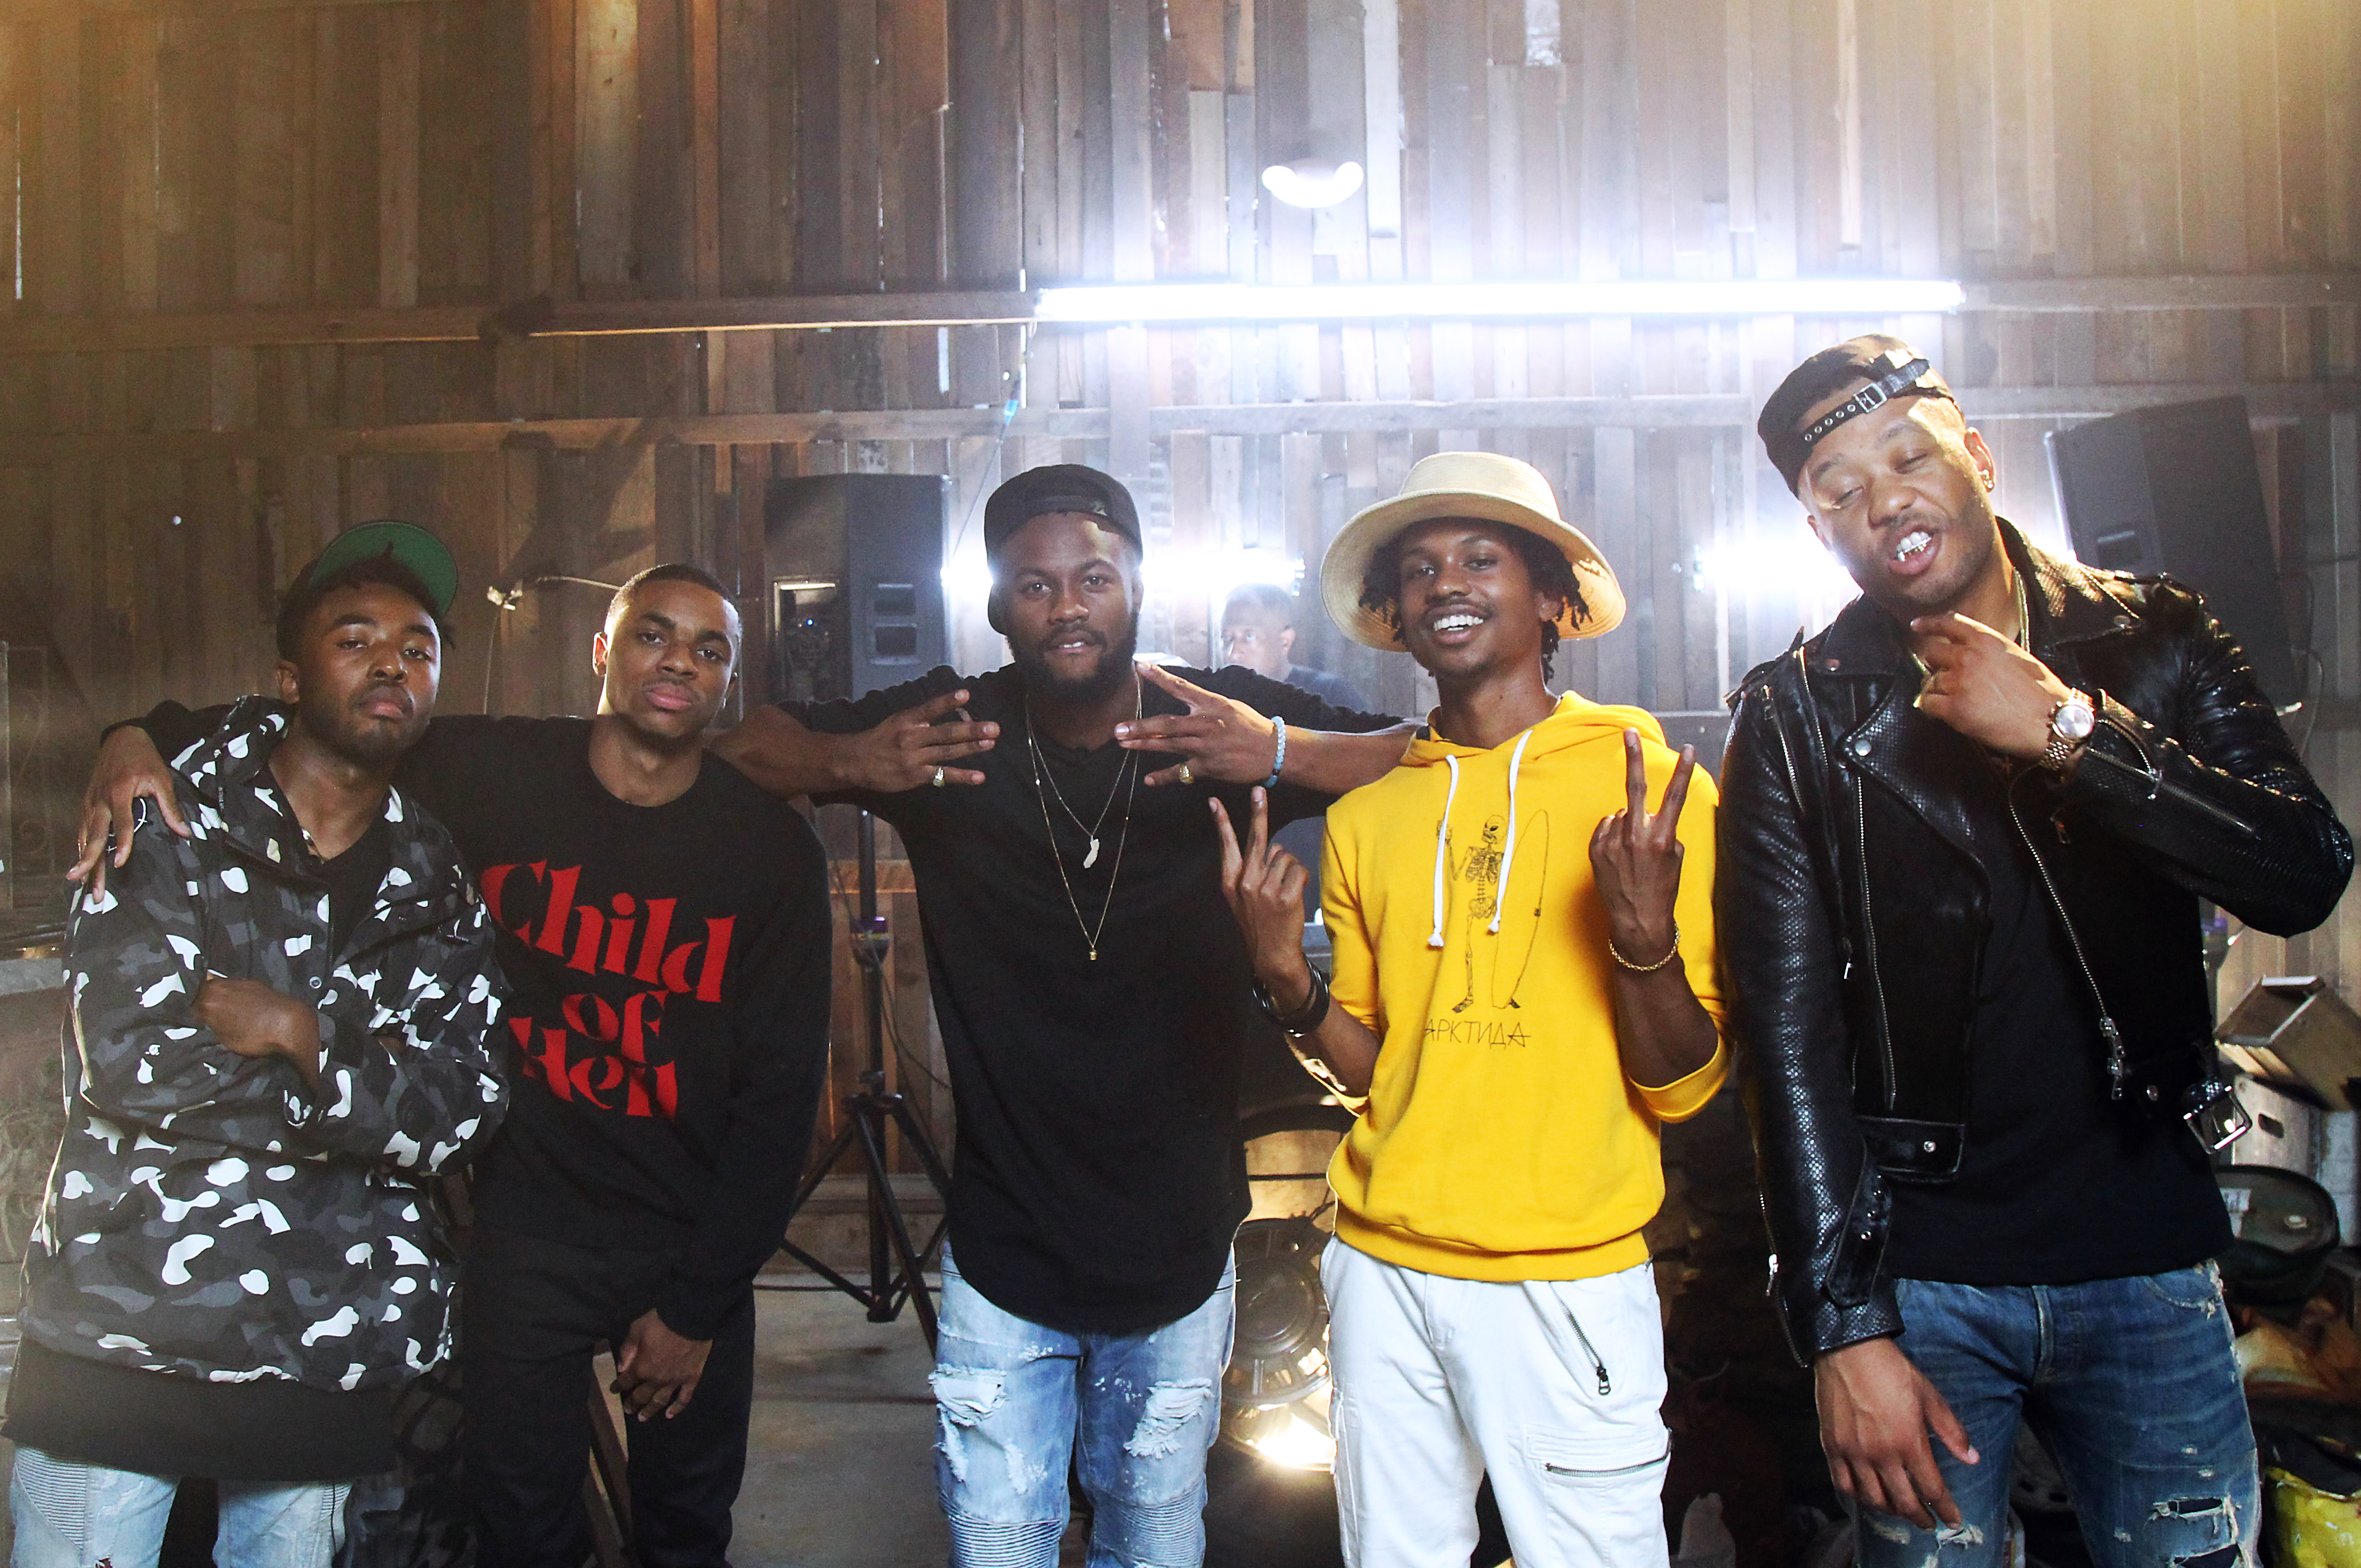 (L - R) King Mez, Vince Staples, King Mez, Raury, J Doe attend BET Hip Hop Awards Cypher Shoots - Day 2 on August 26, 2015 in Brooklyn City.